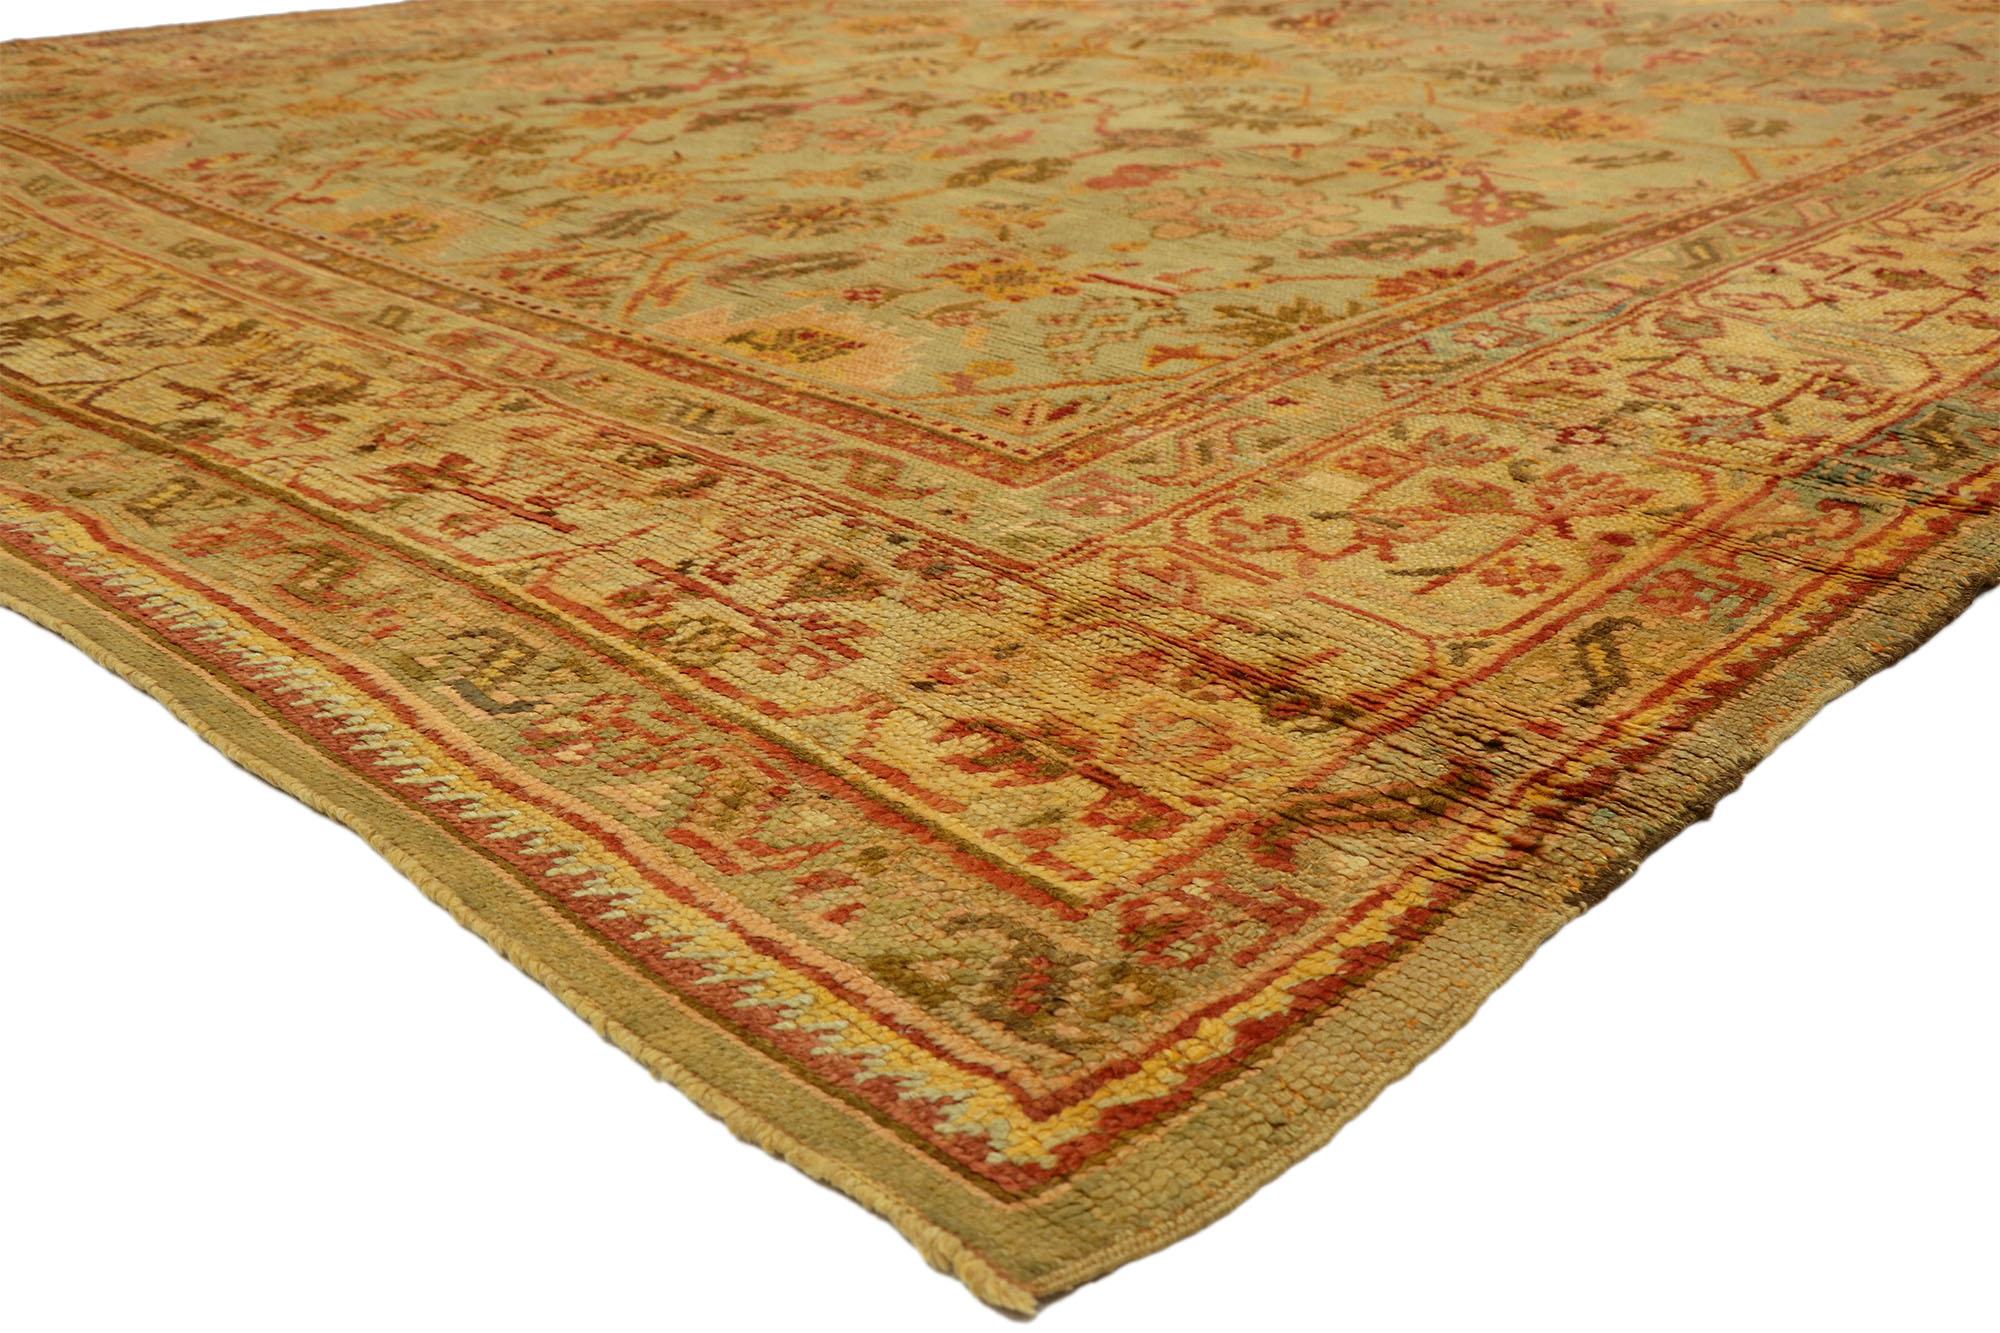 74175 Antique Turkish Oushak Rug, 10'05 x 14'03.
Italian Nonna Chic meets electic elegance in this hand knotted wool antique Turkish Oushak rug. The artisan details and sedimentary layers of color woven into this piece work together creating an